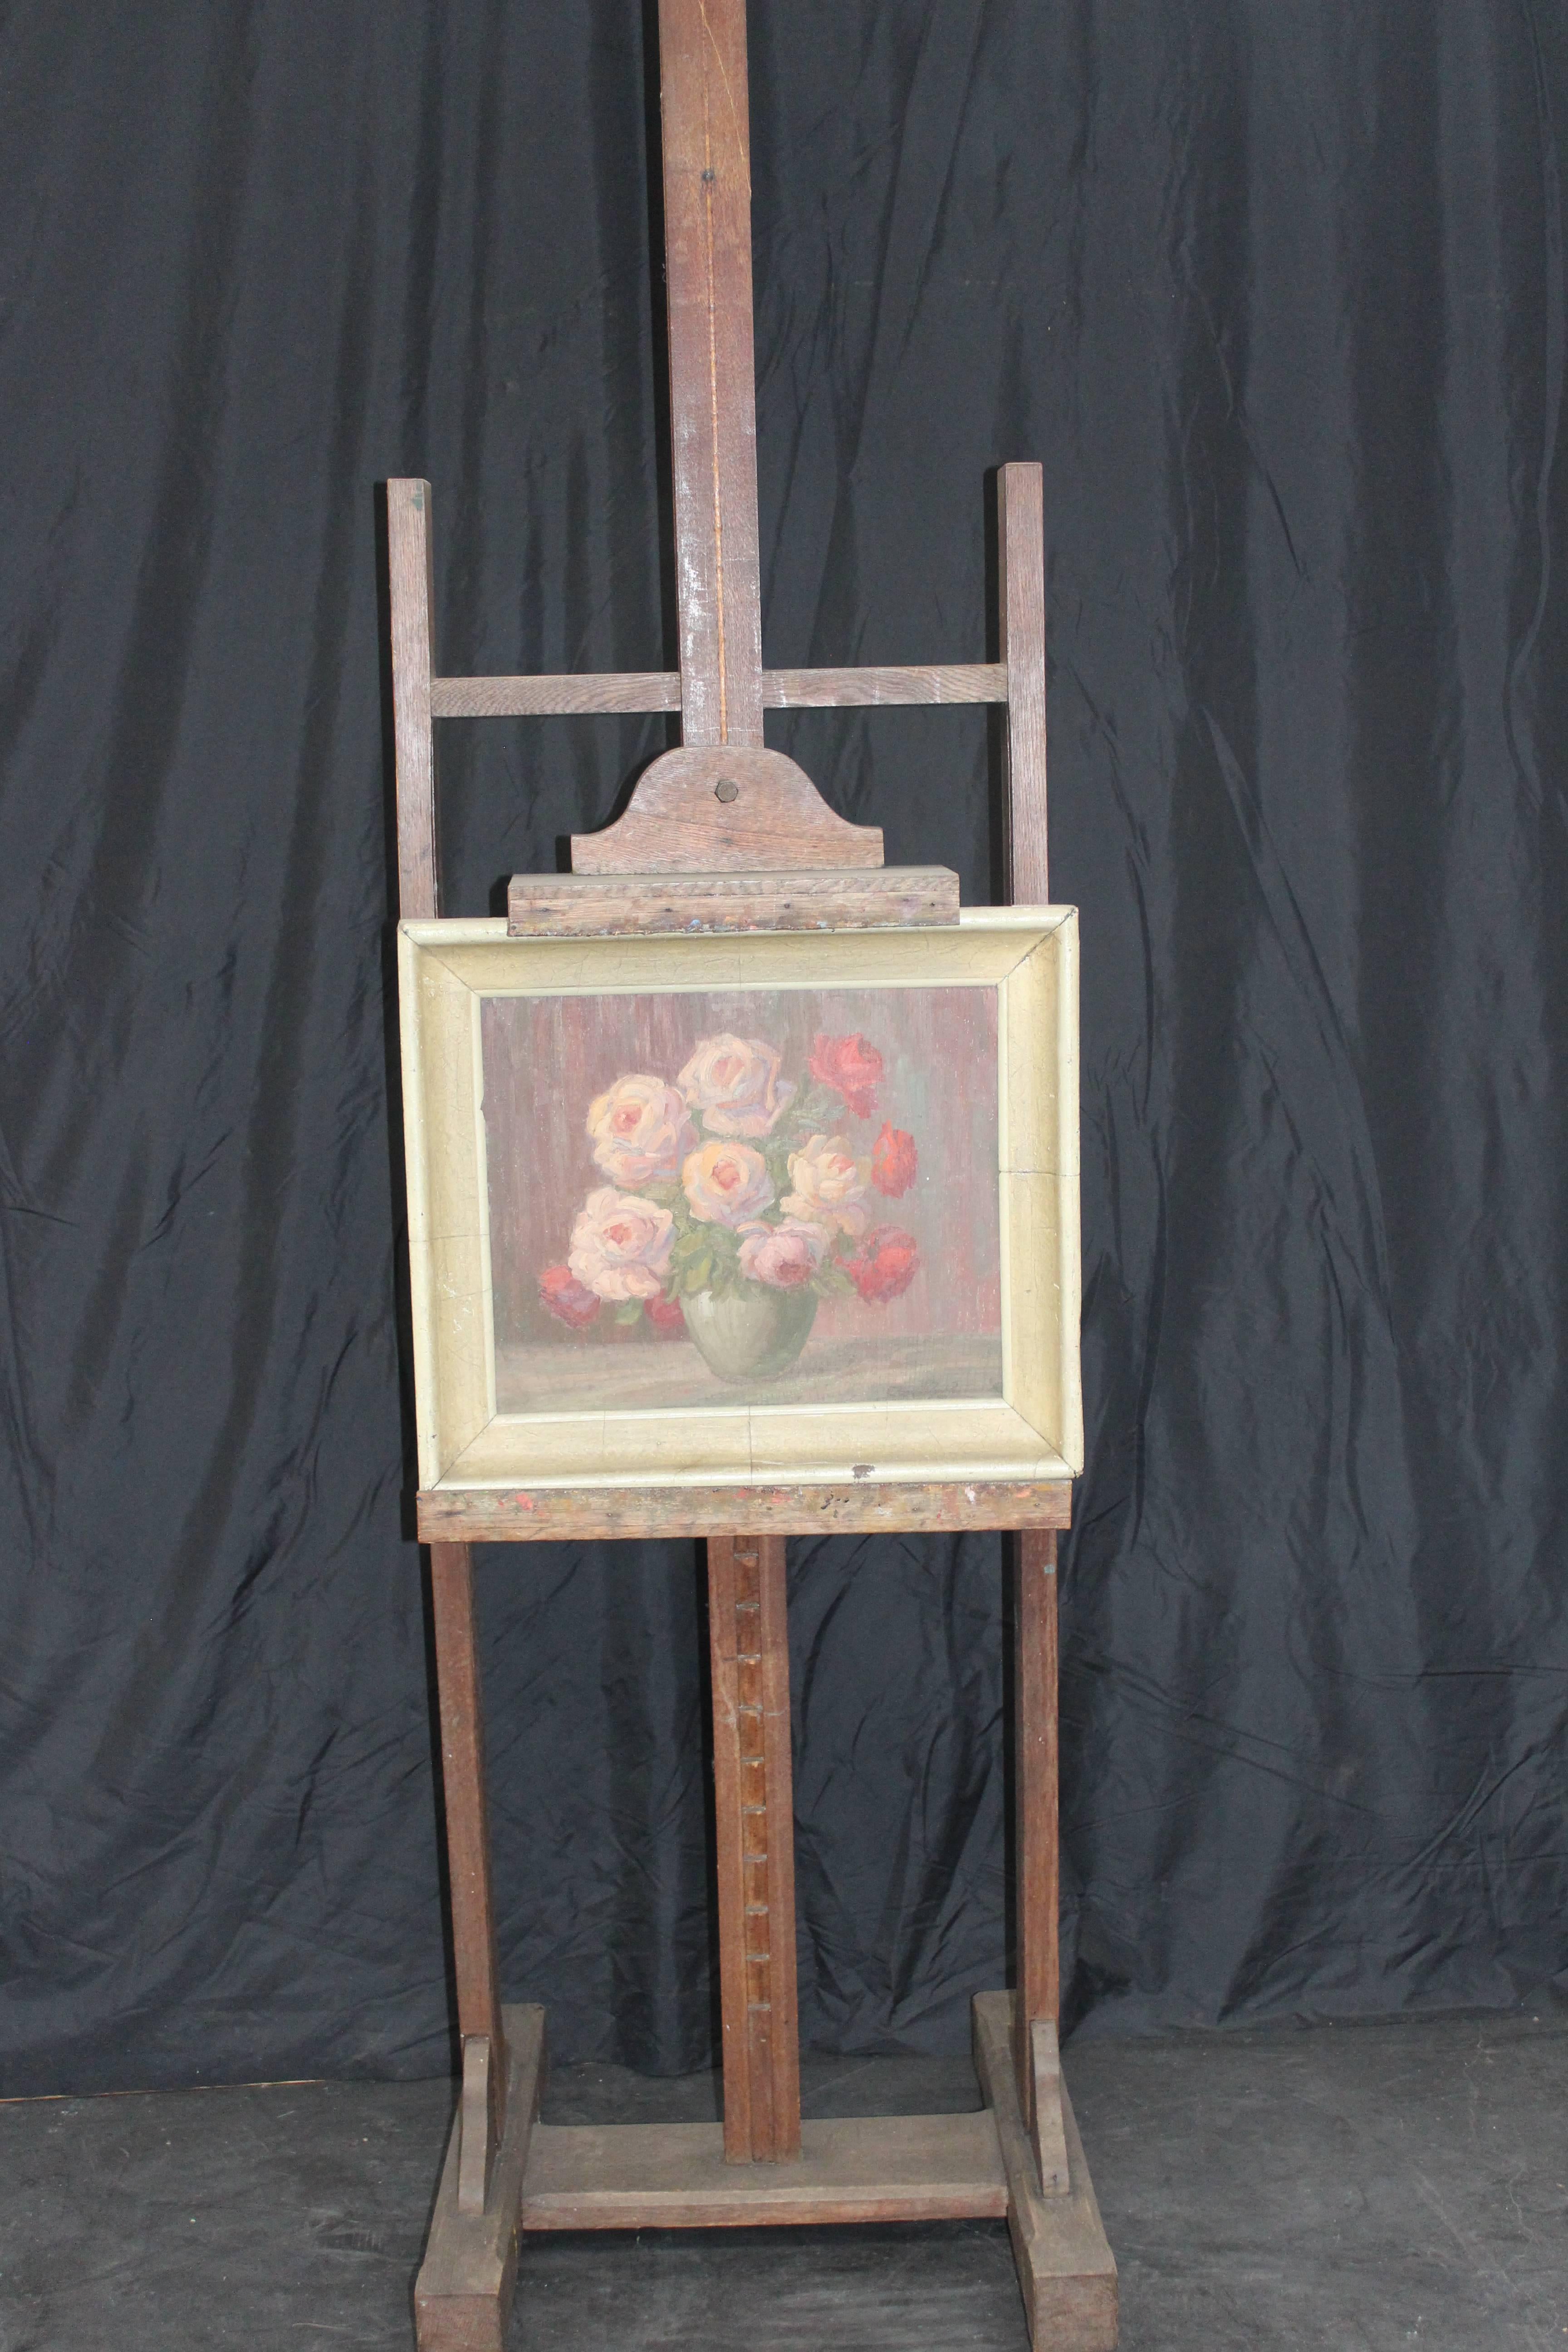 Nice Old Adjustble rolling Painters Easel made in solid oak .
Very good quality piece.
Used by very famous painters as......????
